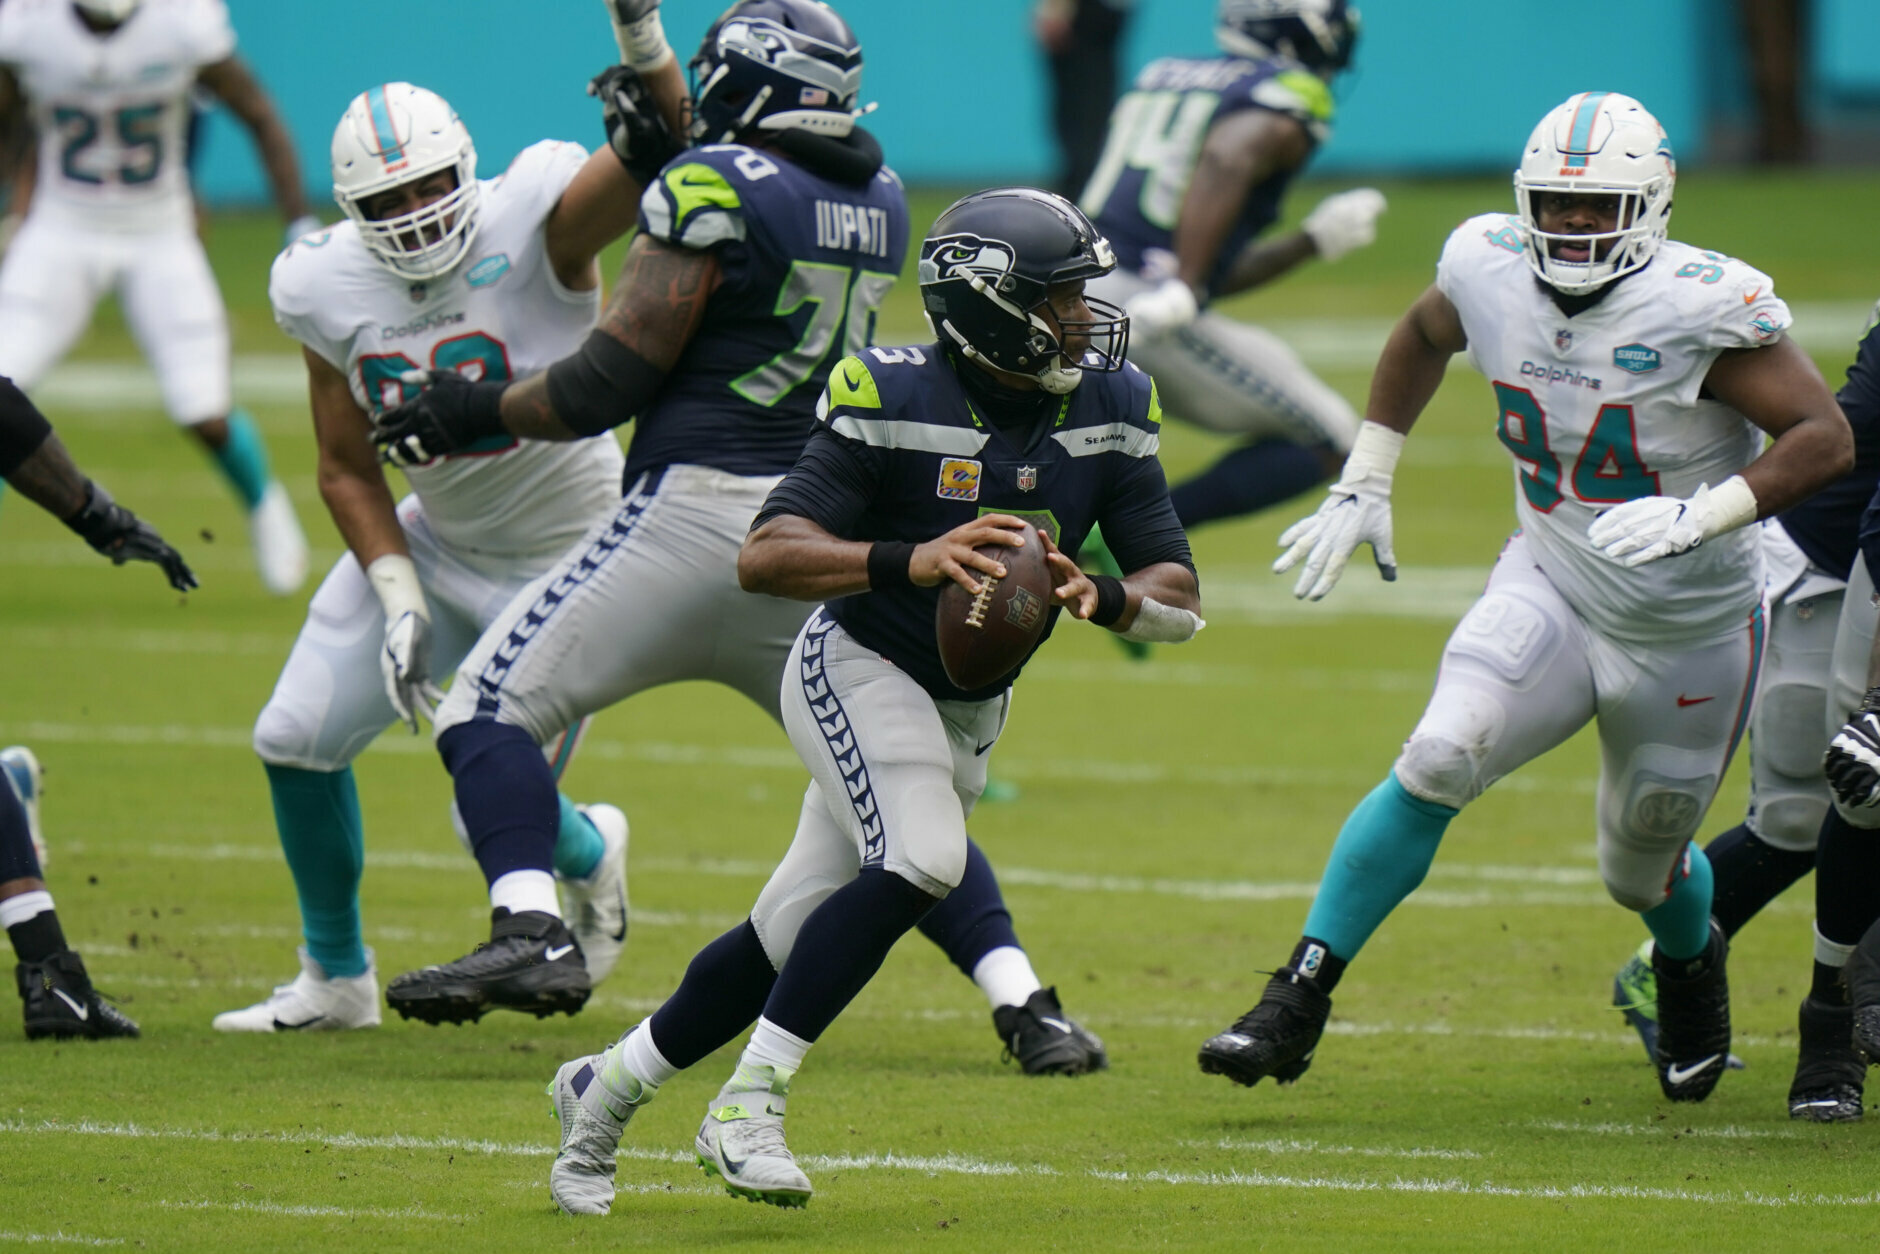 <p><b><i>Seahawks 31</i></b><br />
<b><i>Dolphins 23</i></b></p>
<p>Seattle&#8217;s defense continues to give up 300-yard passing games, but Russell Wilson keeps outdueling all comers, tying the NFL record with 16 TD passes in the first four games of the season. He could legit go from never getting an MVP vote to being a unanimous choice for the award.</p>
